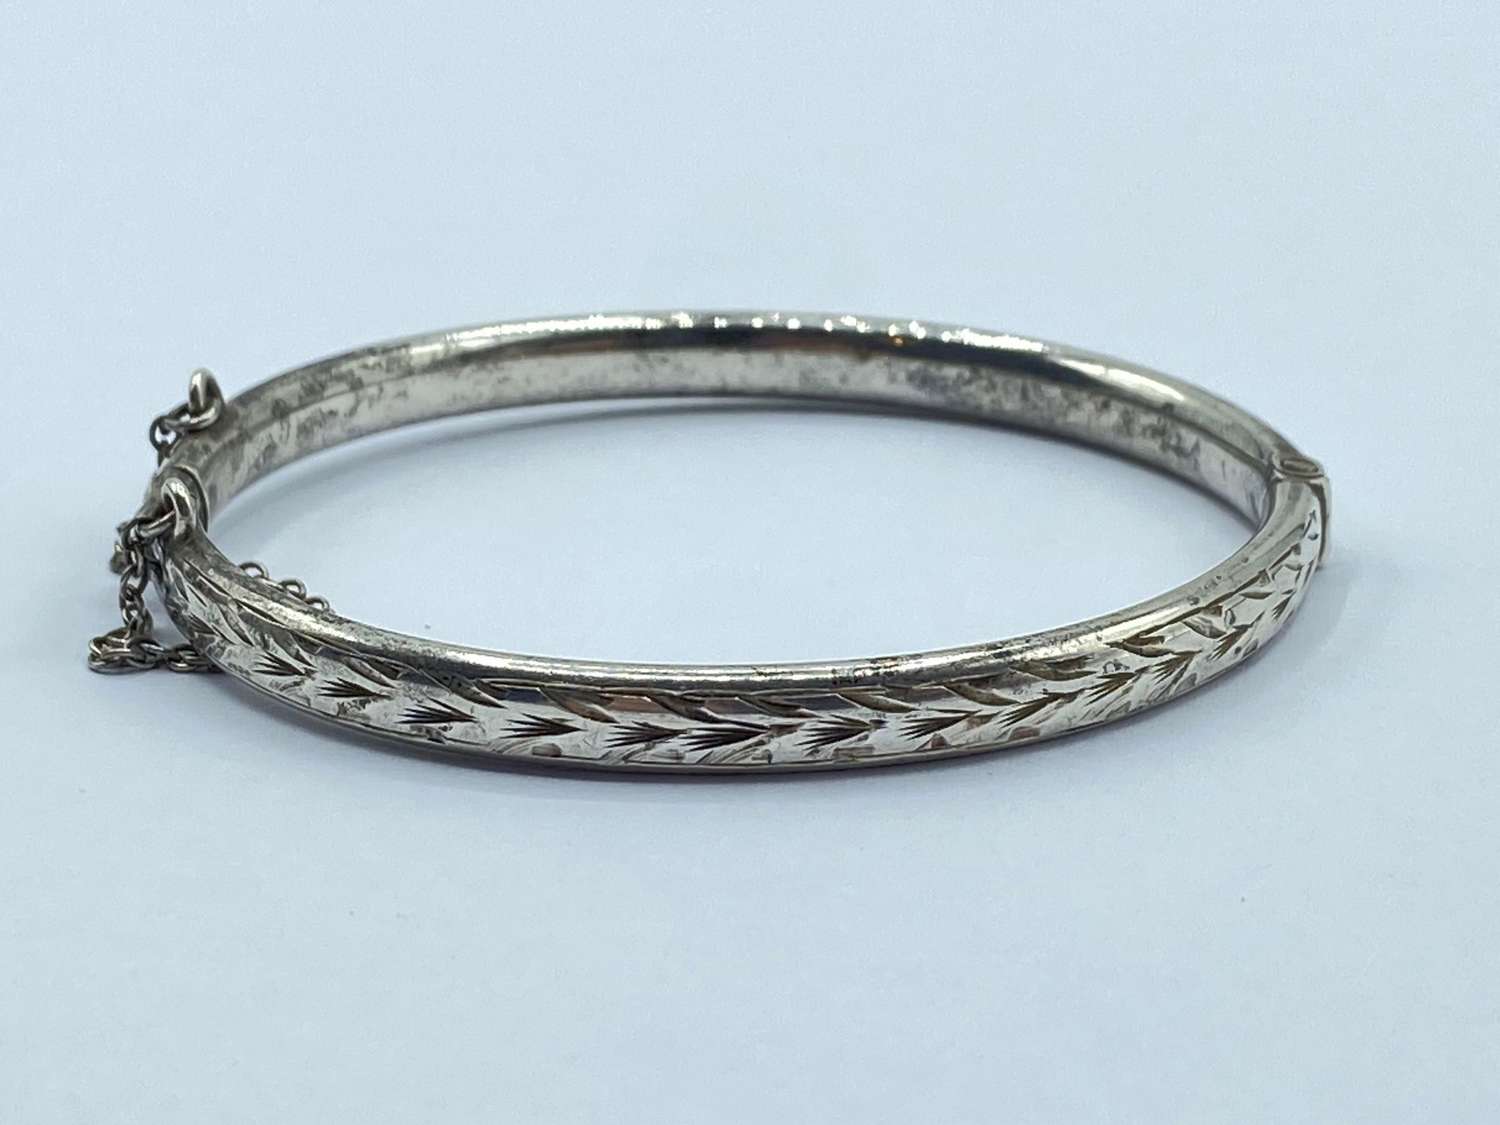 Beautiful Antique Sterling Silver Ladies Bangle & Safety Chain